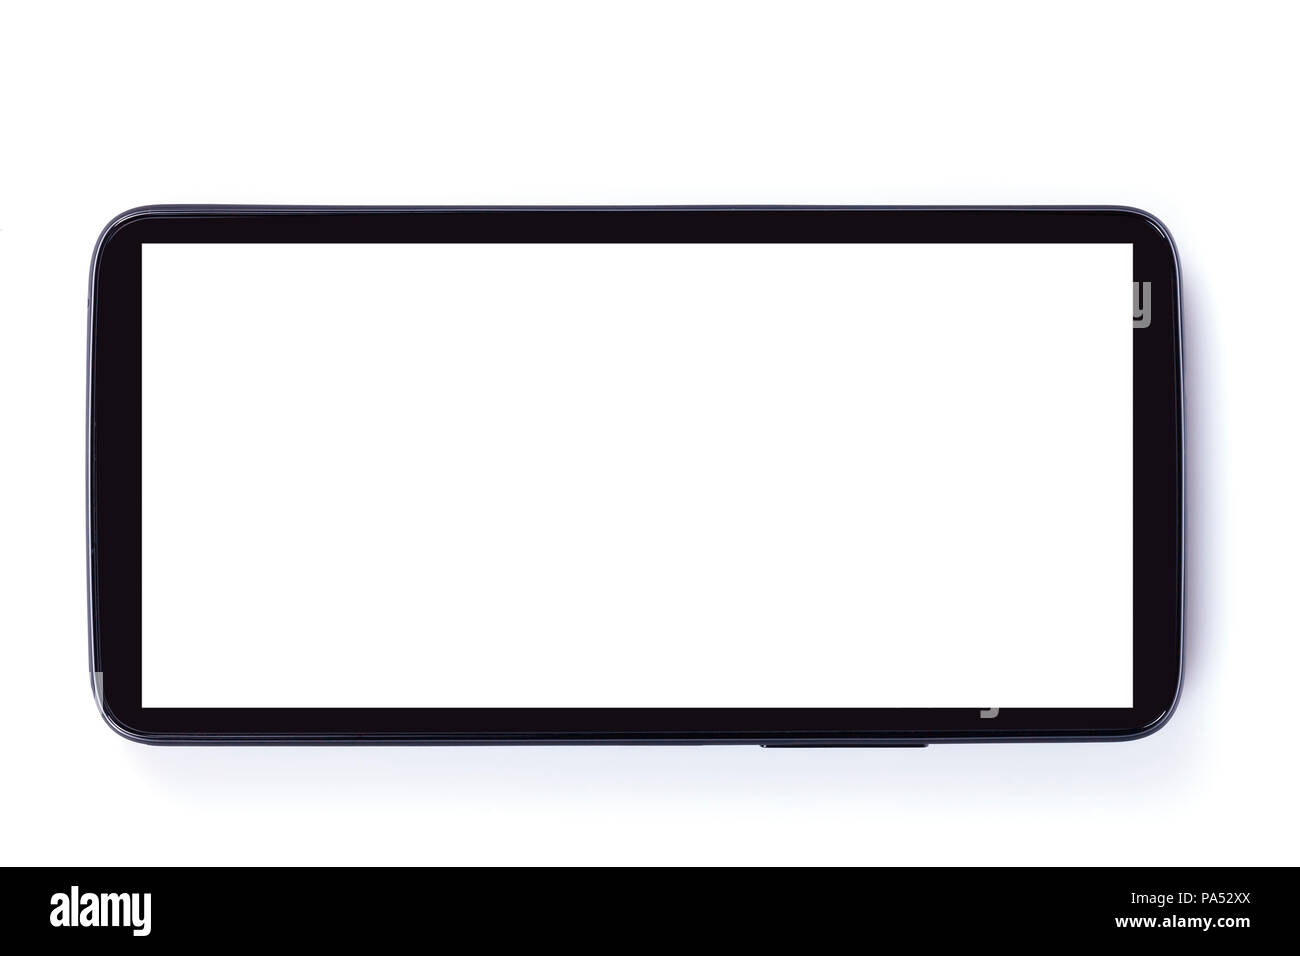 A black tablet with a blank screen isolated on white. Stock Photo